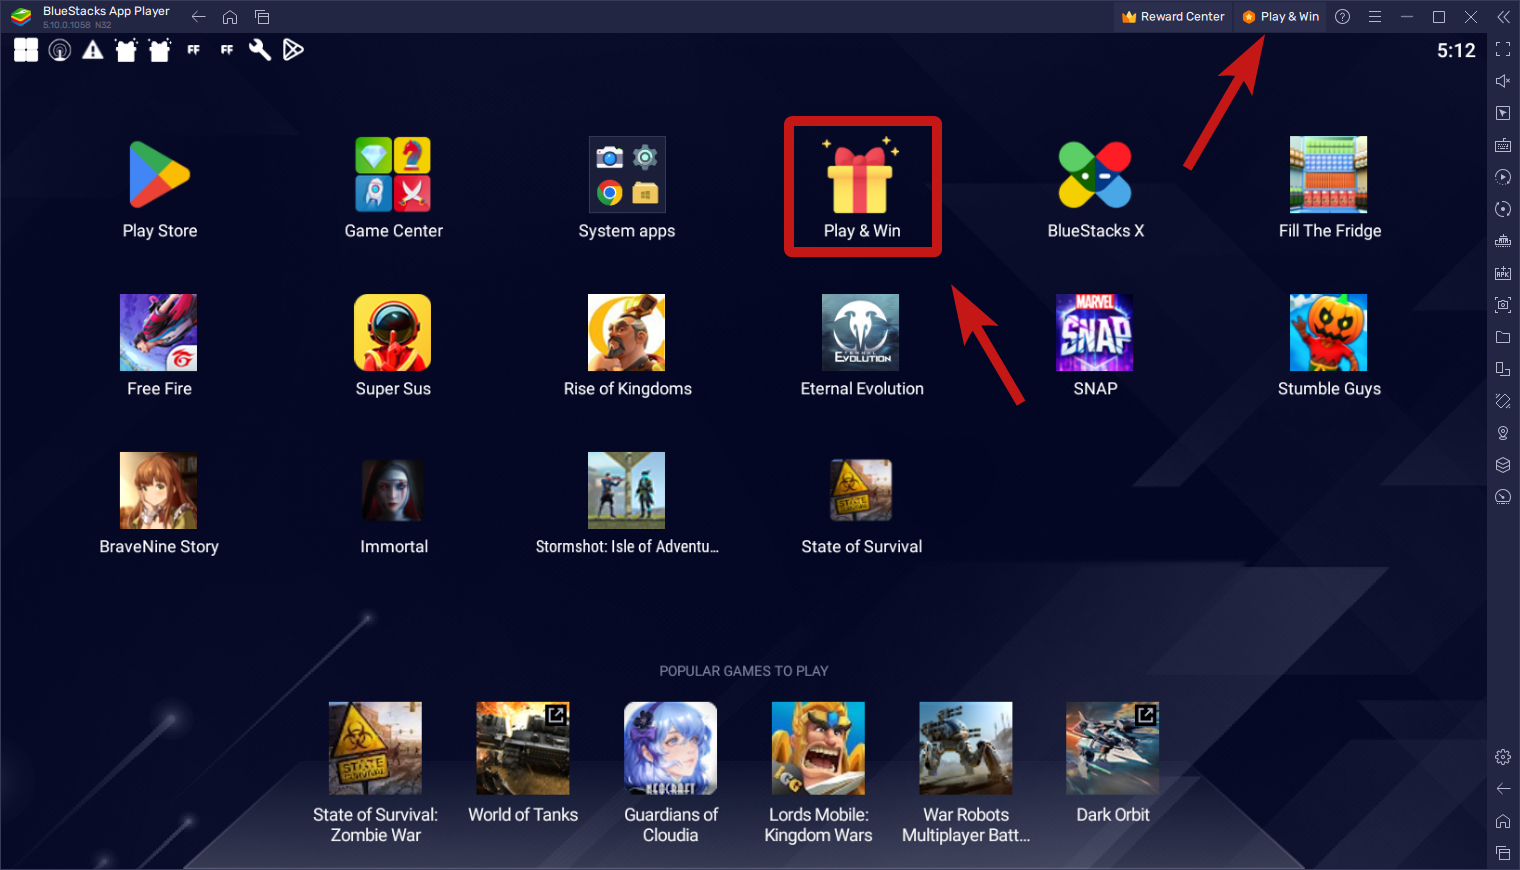 BlueStacks 5 ‘Play & Win’ Feature Lets Players Earn Awesome Digital and Physical Rewards